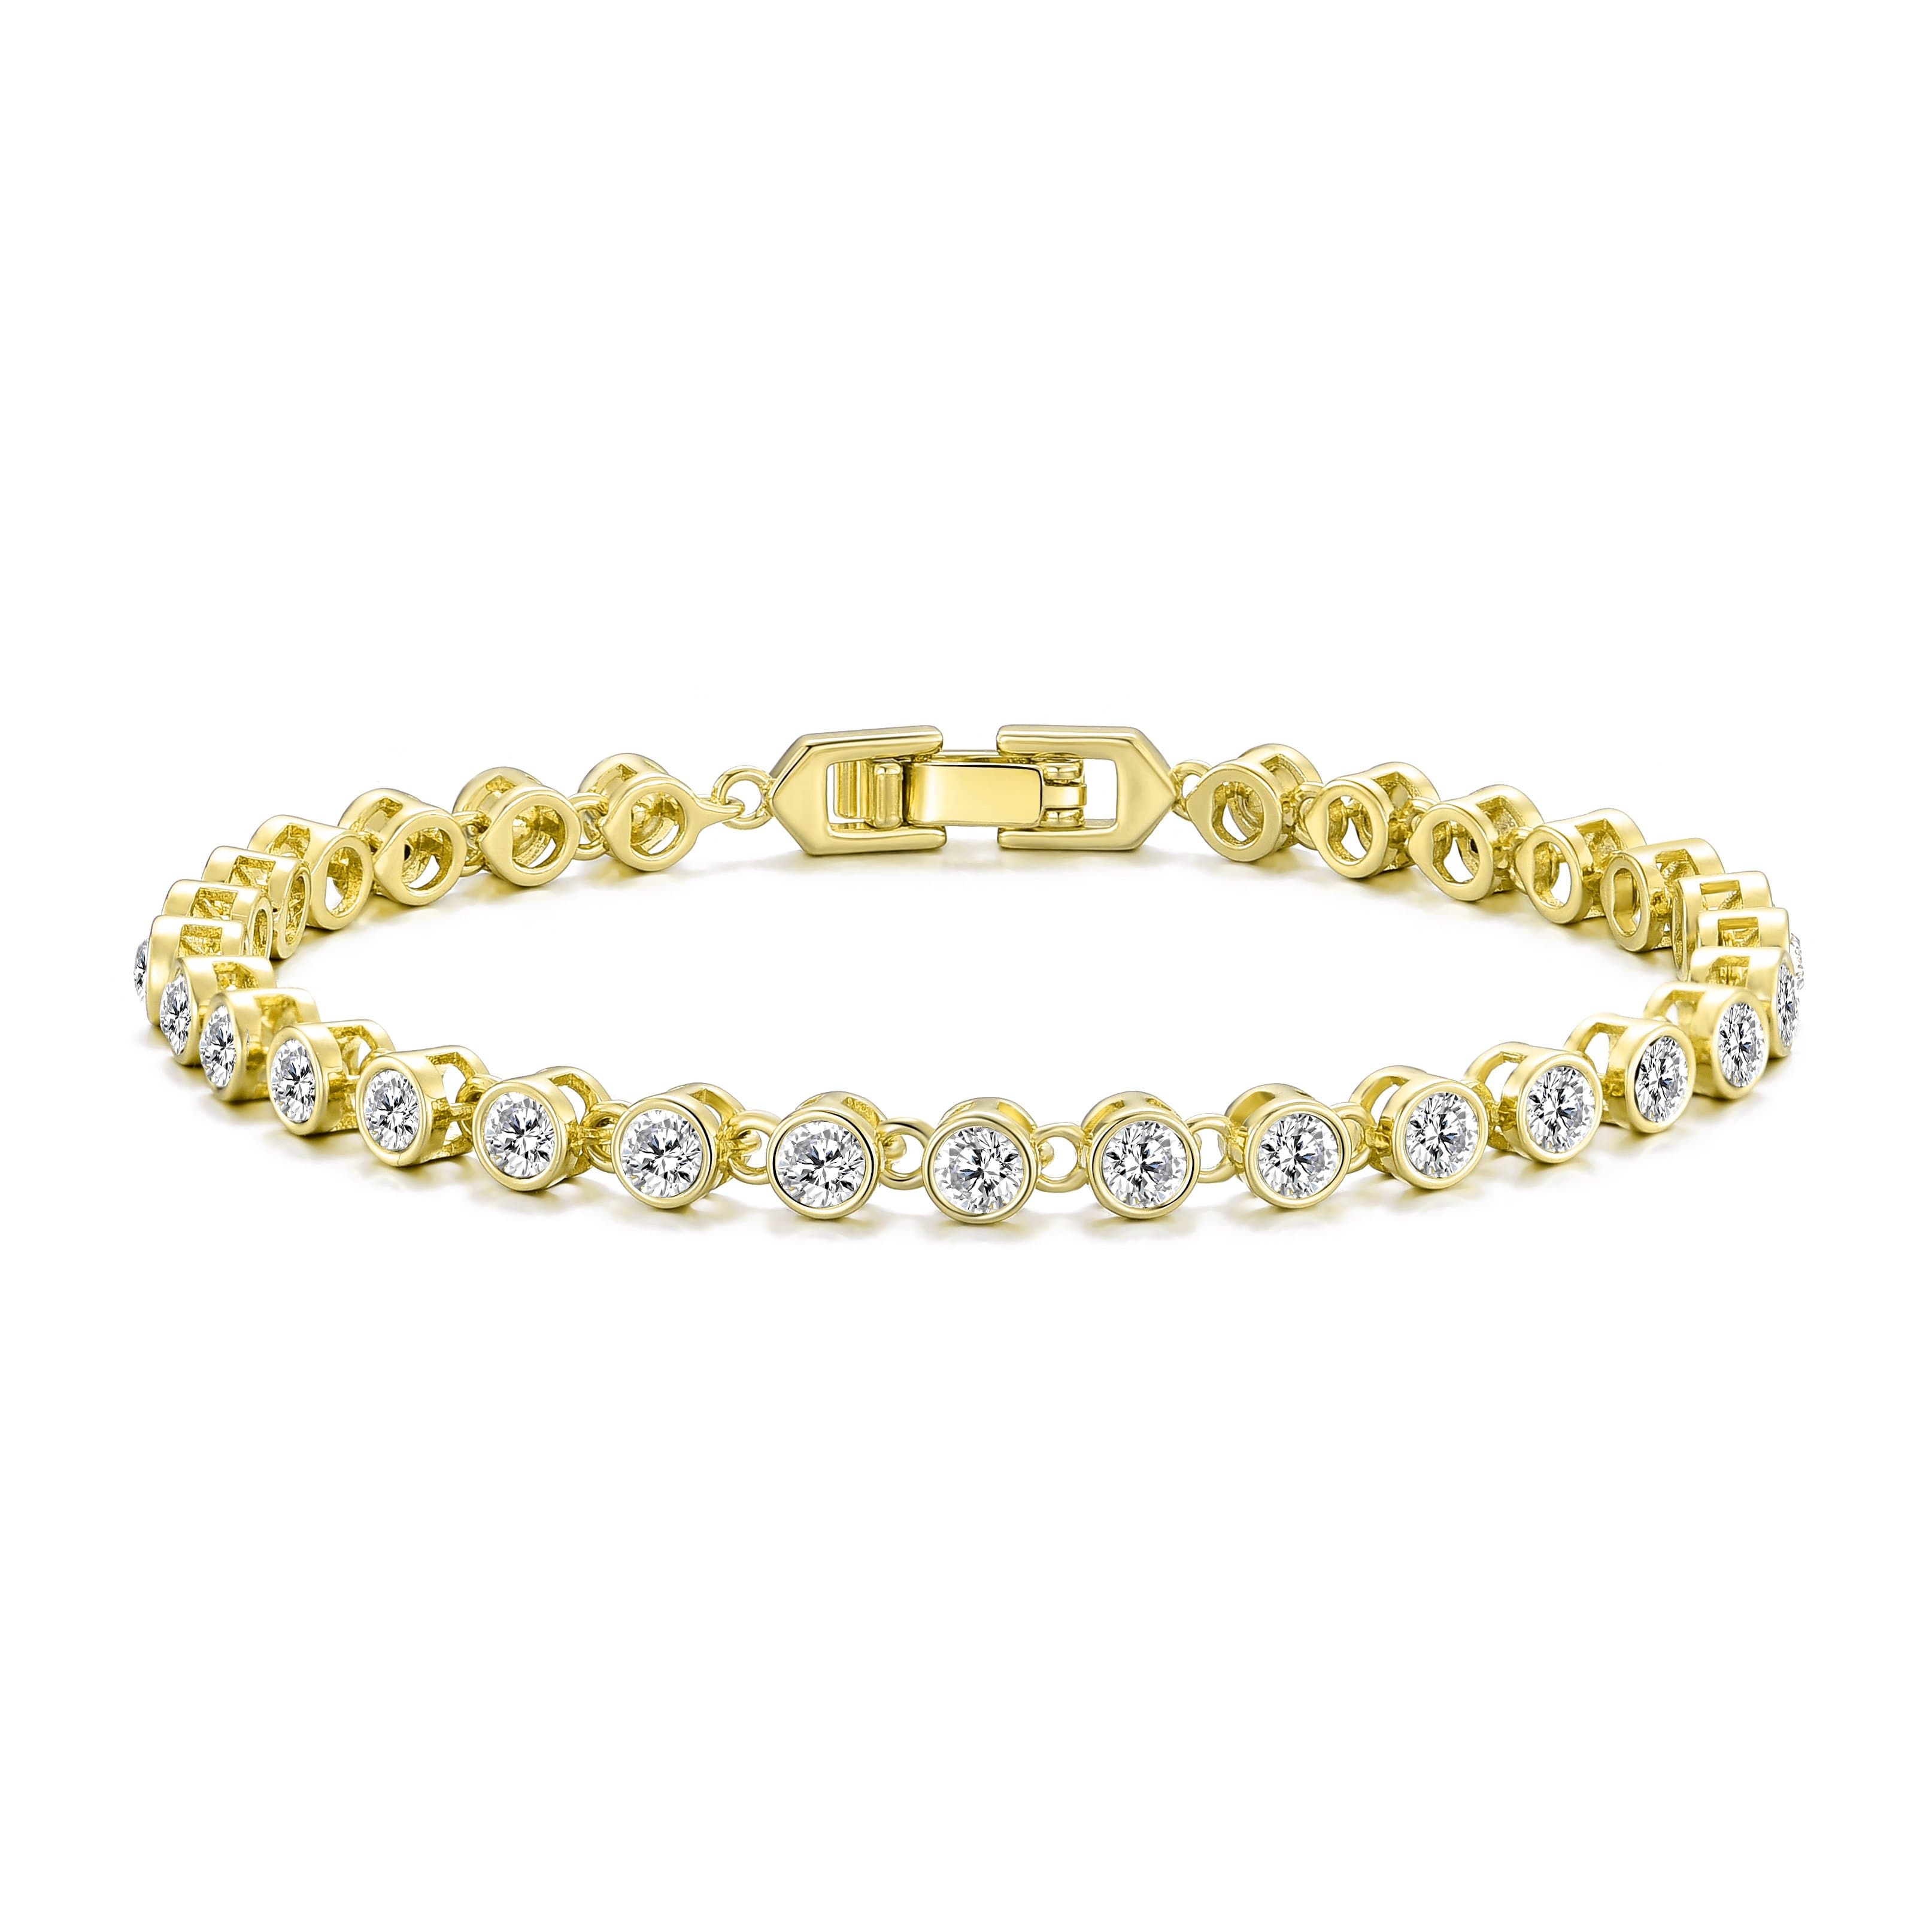 Gold Plated Solitaire Bracelet Created with Zircondia® Crystals by Philip Jones Jewellery